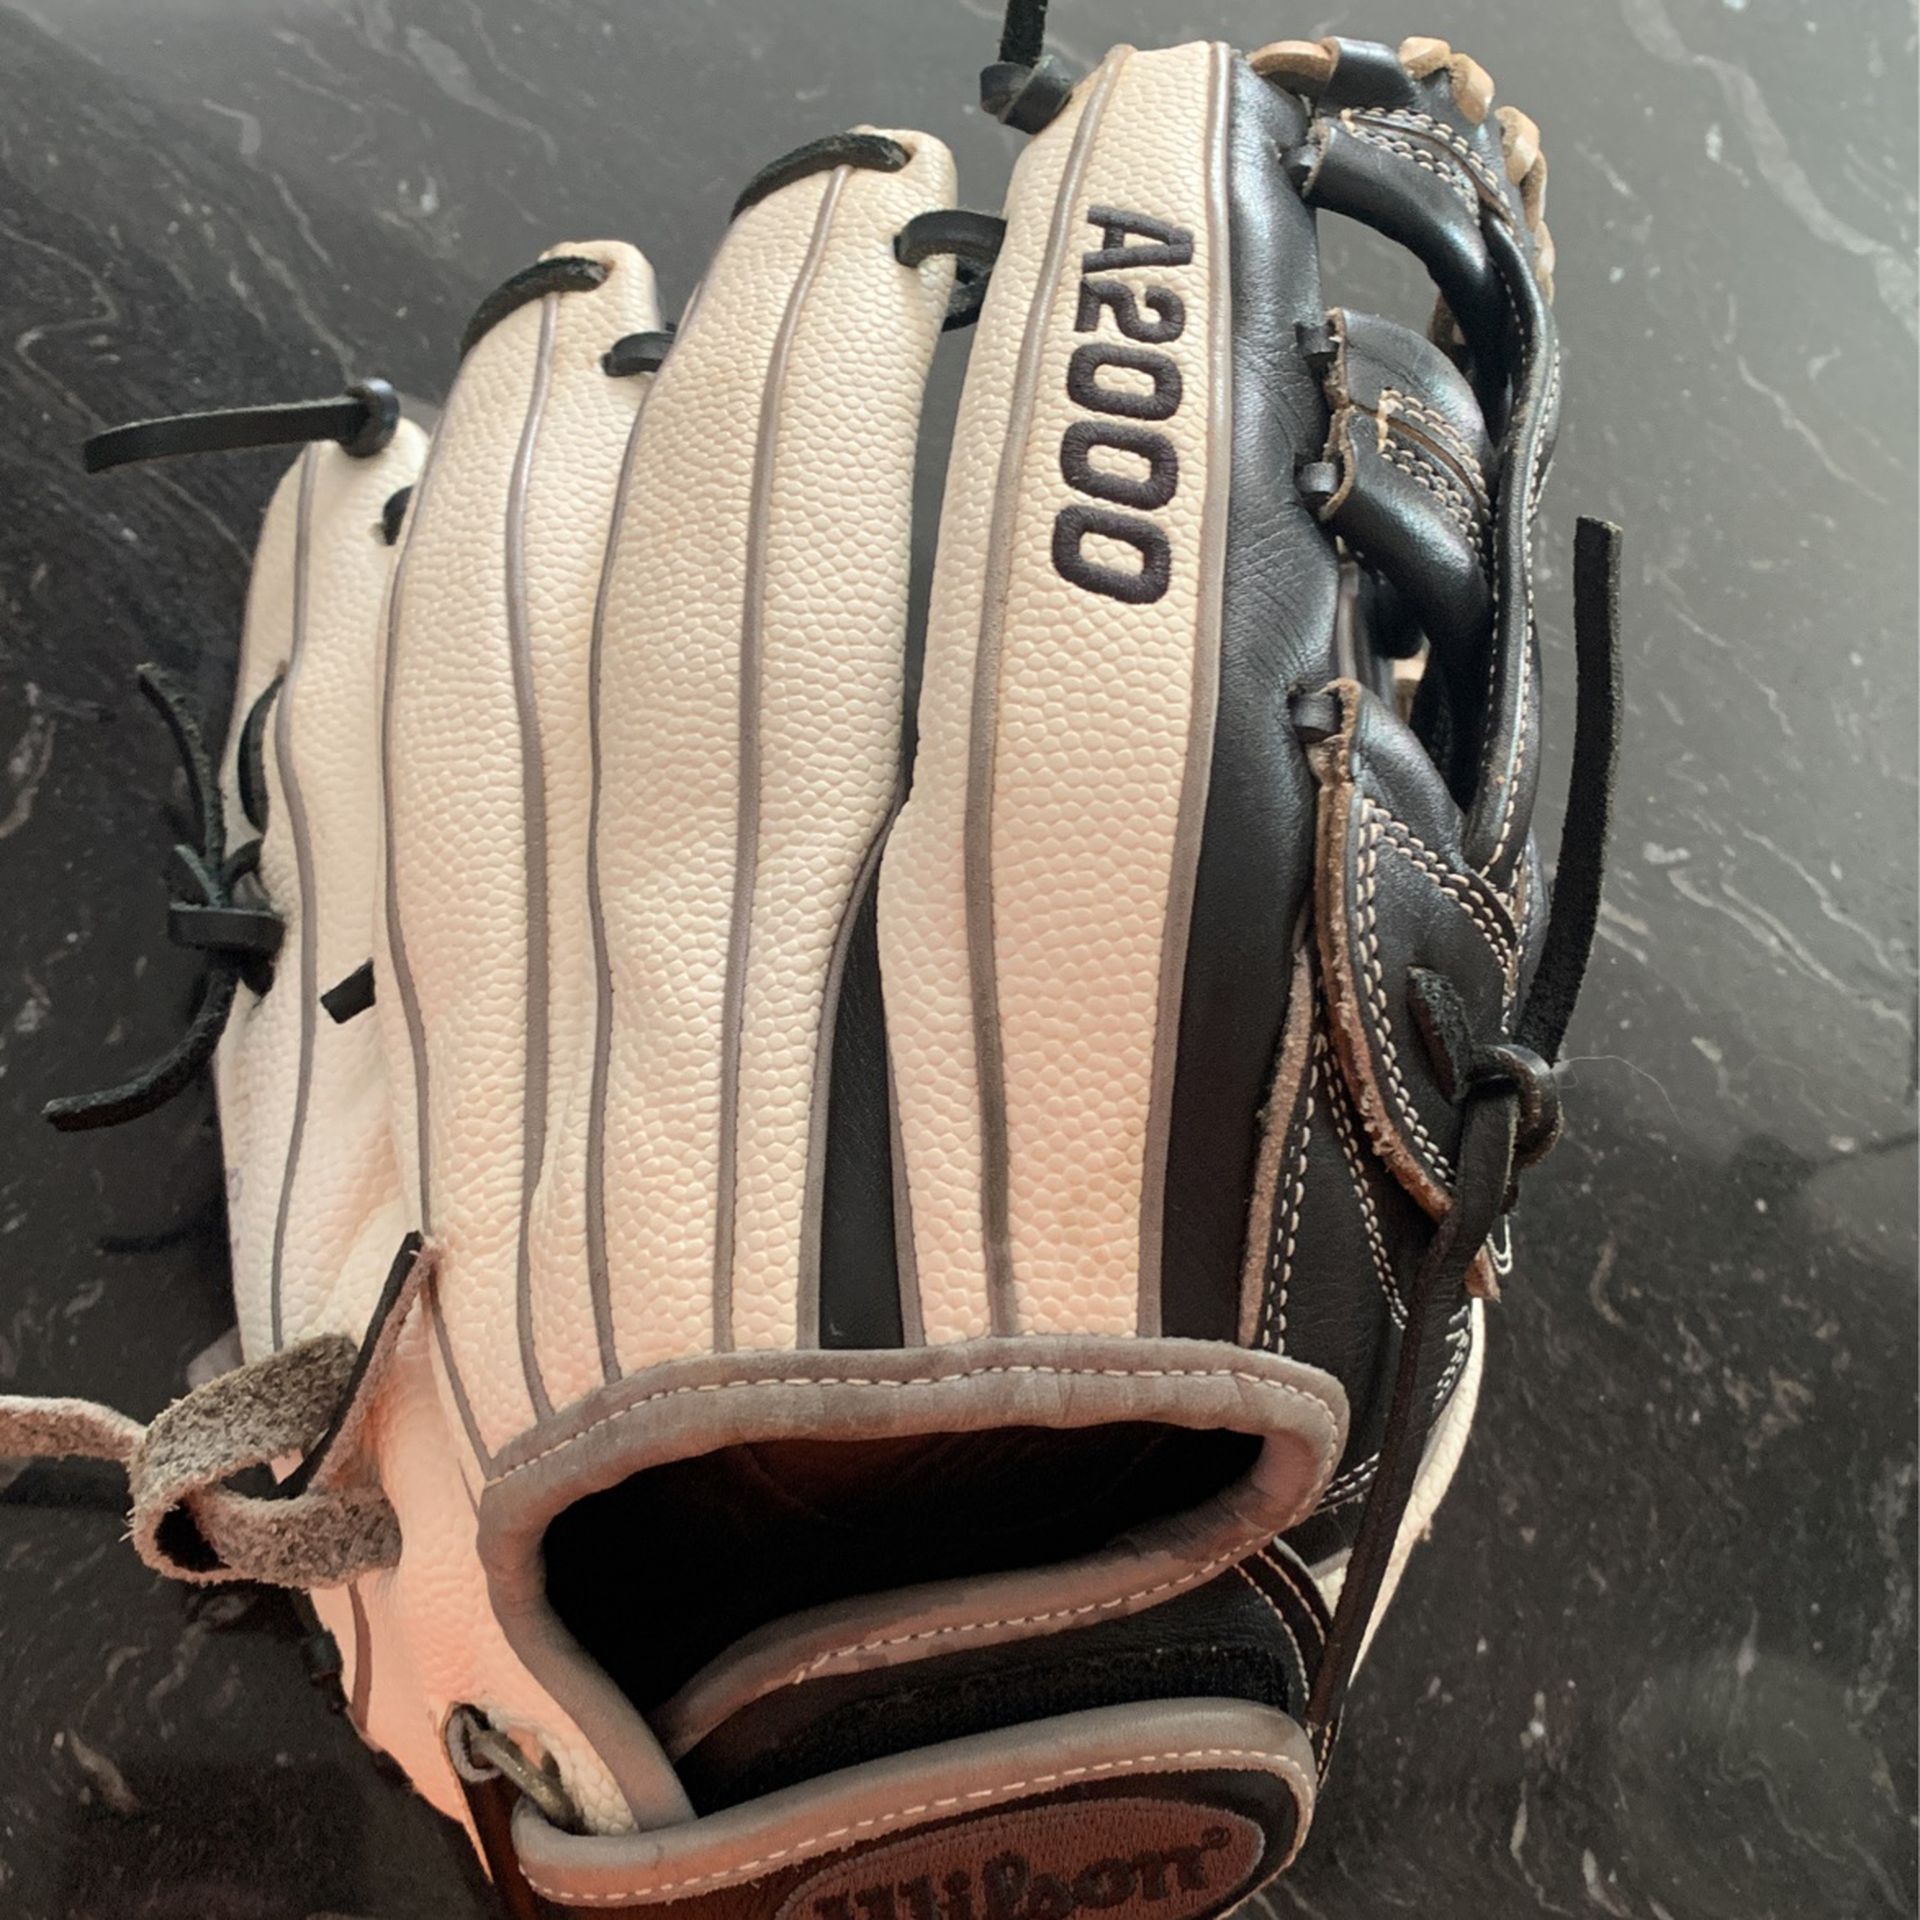 Woman’s Wilson A2000 Fast Pitch Glove